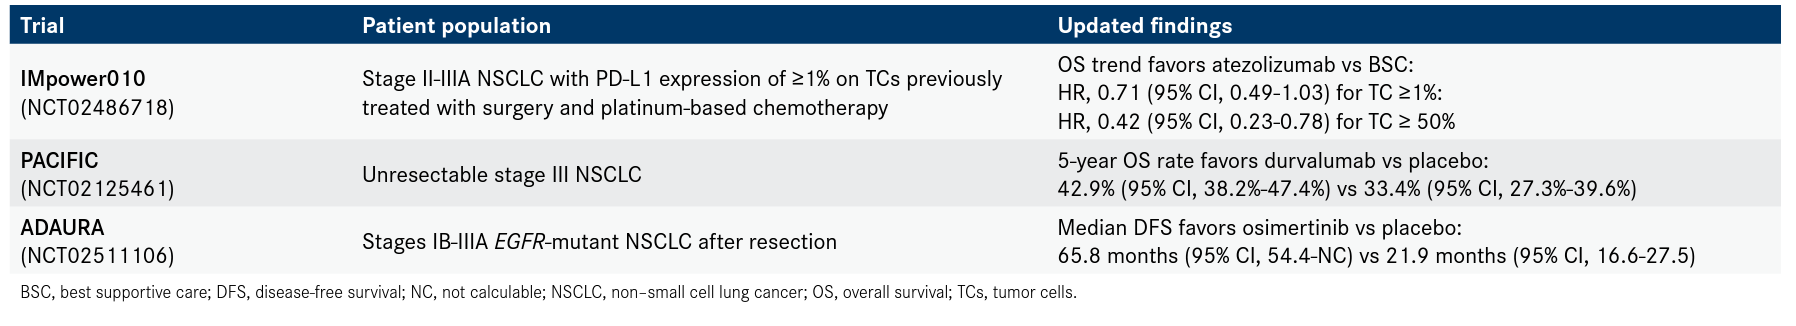 Table. Recent Updates in Key Adjuvant Therapy Findings in NSCLC11-13